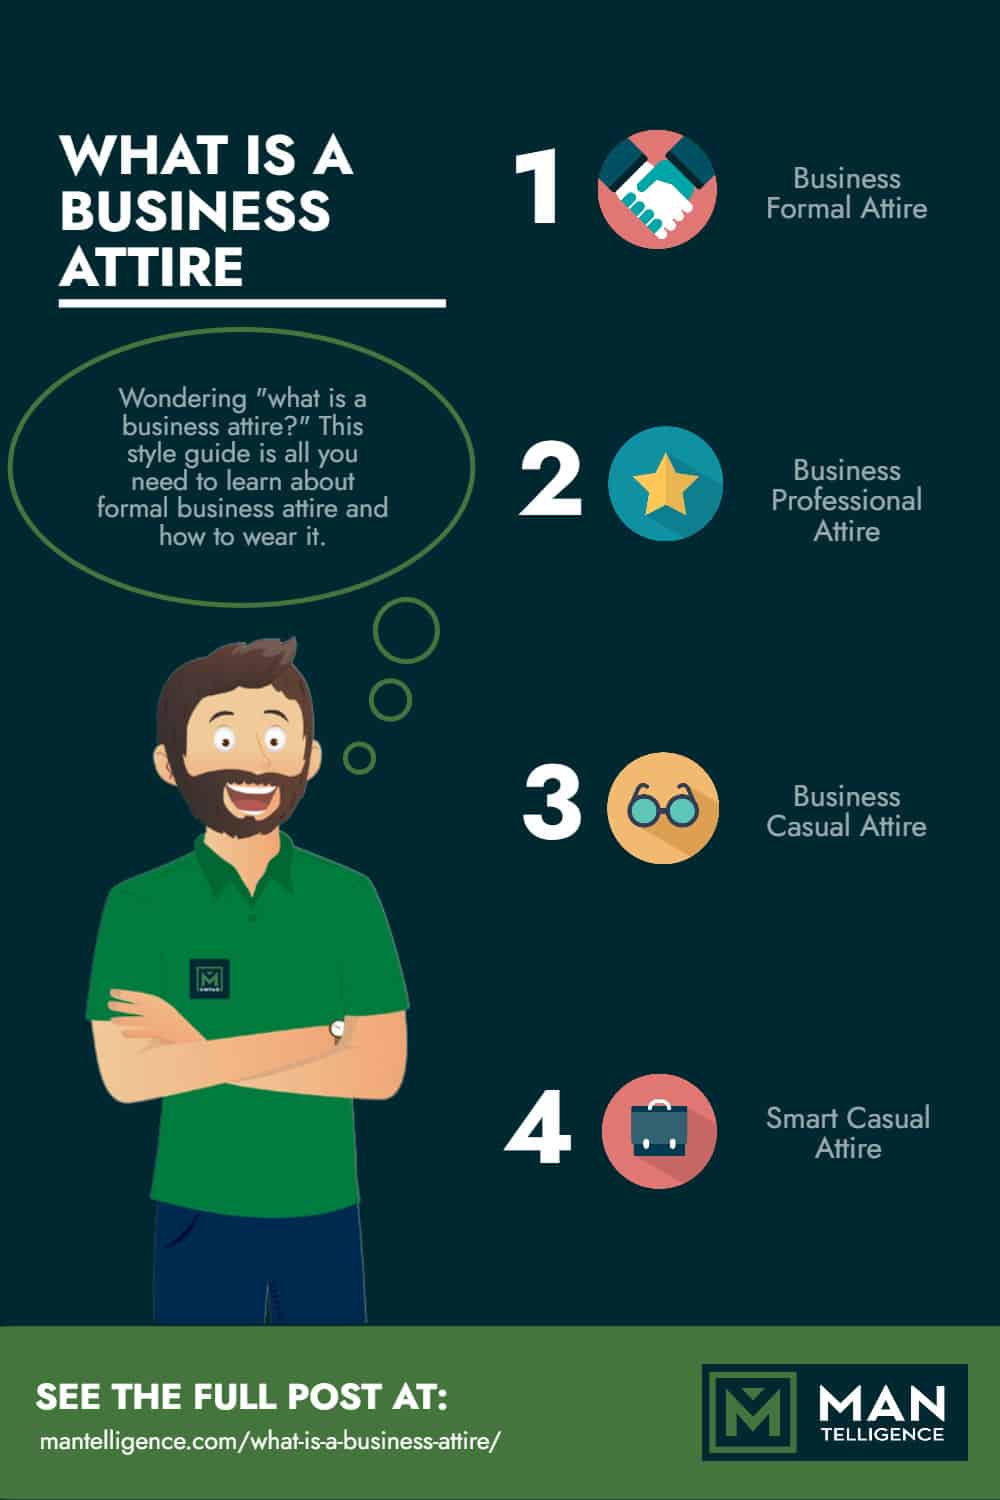 What is a Business Attire - INFOGRAPHIC